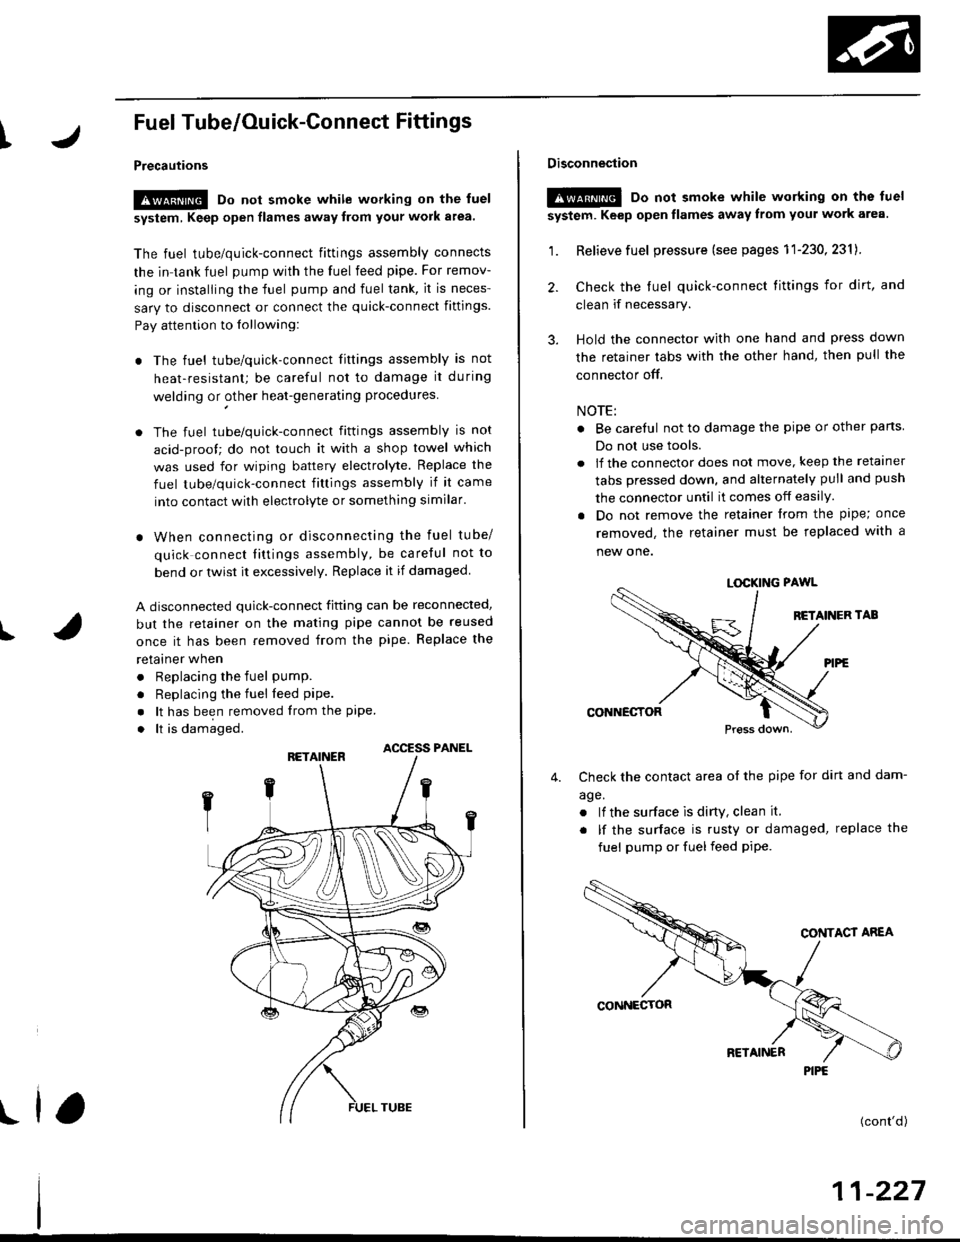 HONDA CIVIC 1996 6.G Owners Manual I
Fuel Tube/Ouick-Gonnect Fittings
Precautions
!@ Do not smoke while working on the fuel
system, Keep open flames away from your work a.ea
The fuel tube/quick-connect fittings assembly connects
the i